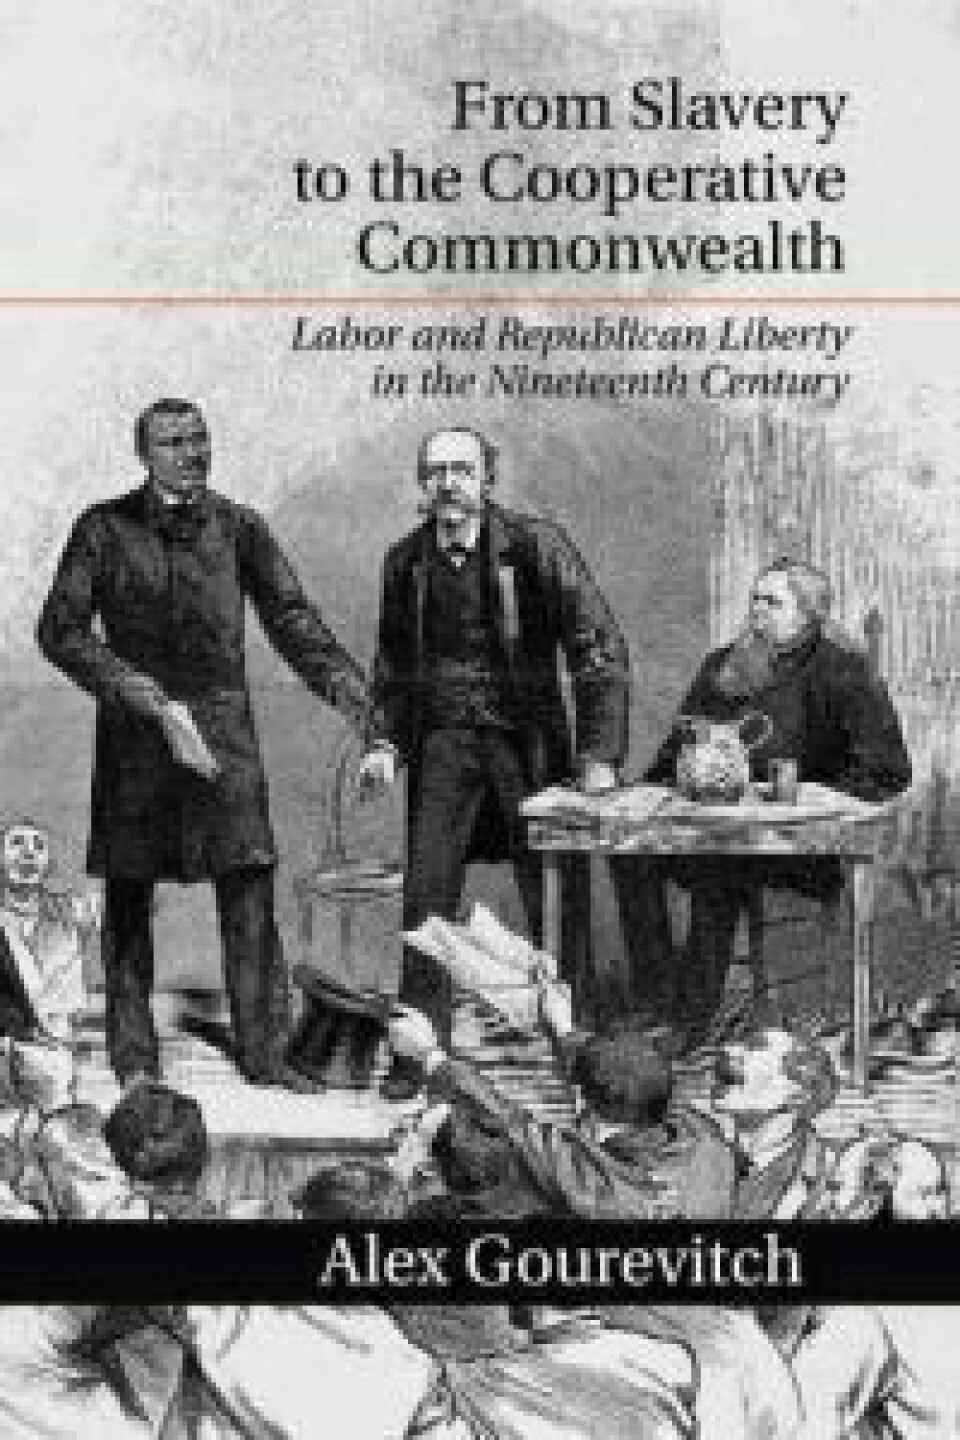 Alex Gourevitch: From Slavery to the Cooperative Commonwealth. Cambridge University Press. (2014)